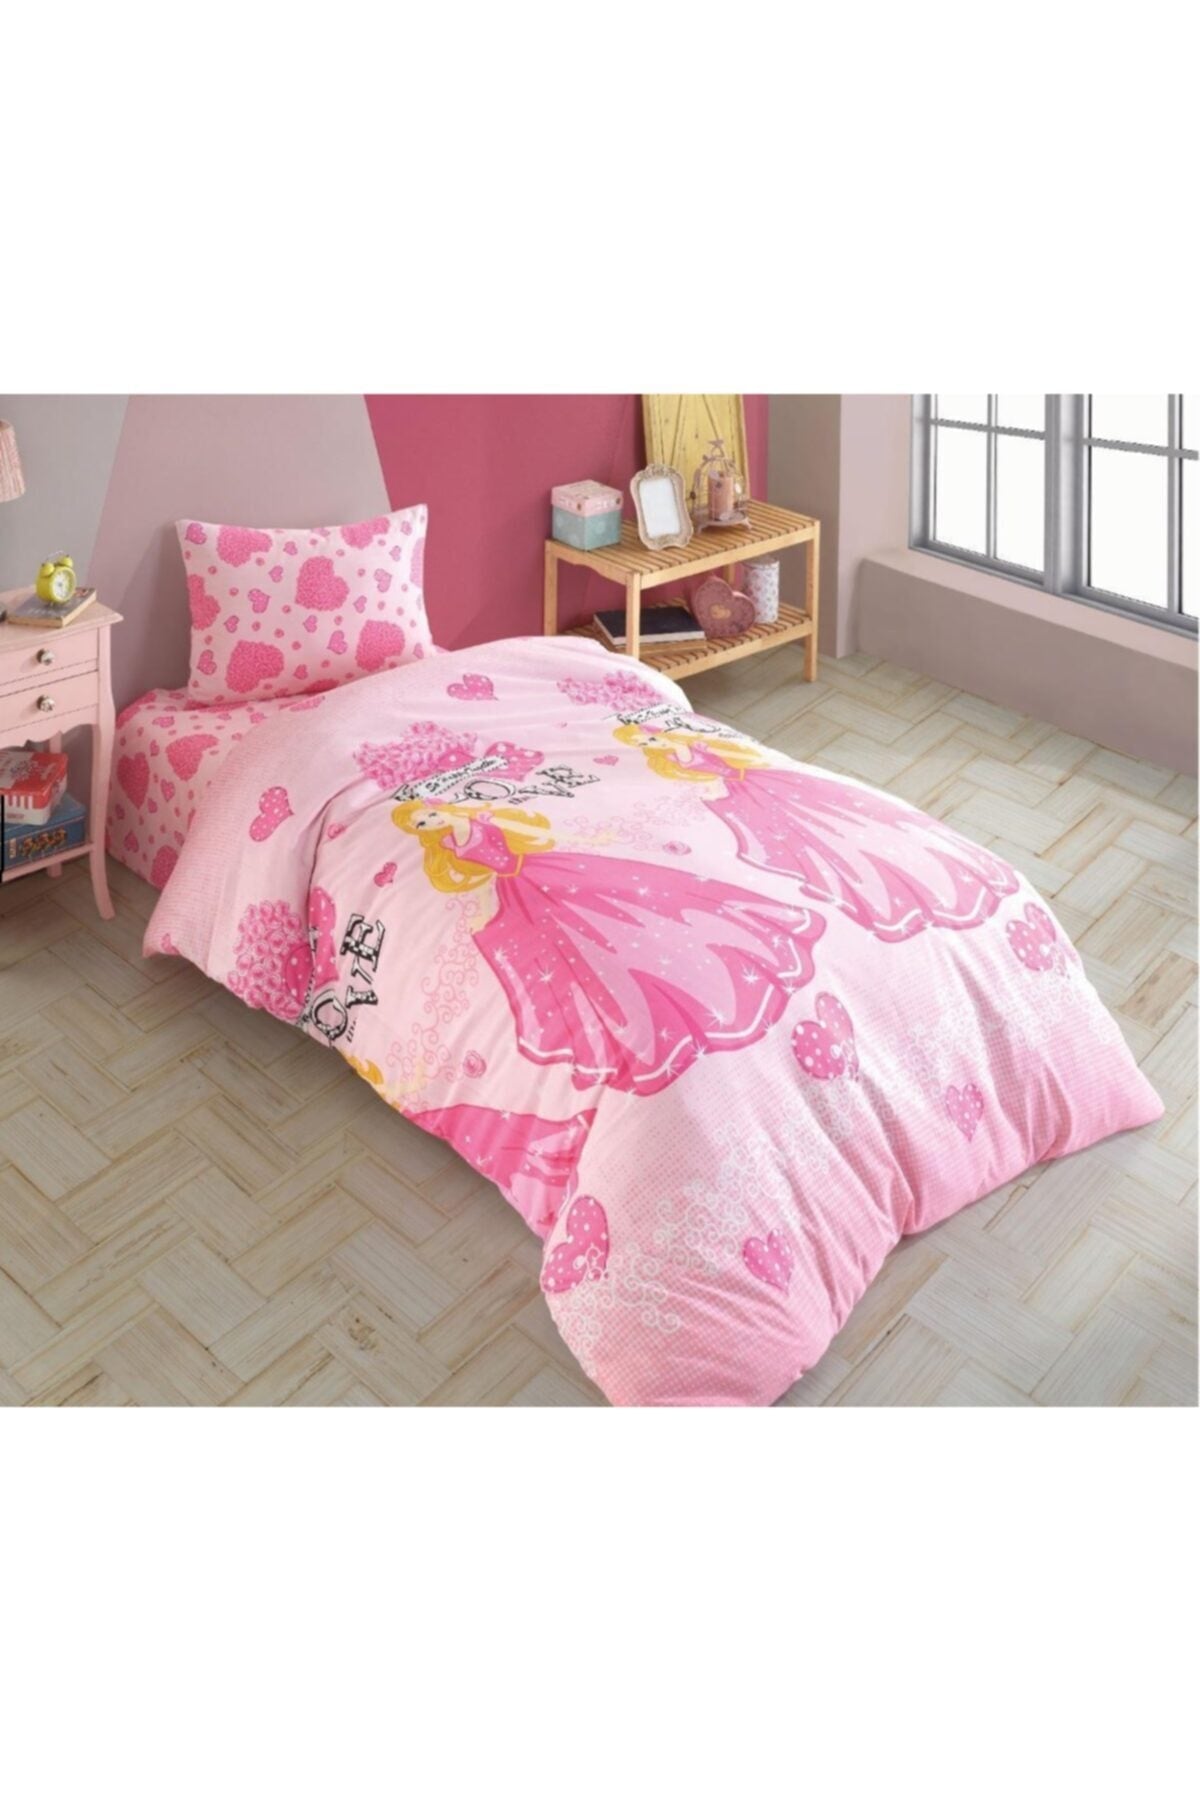 Elastic Fitted Healthy Snow White Pink Heart Single Child Girl Duvet Cover Set